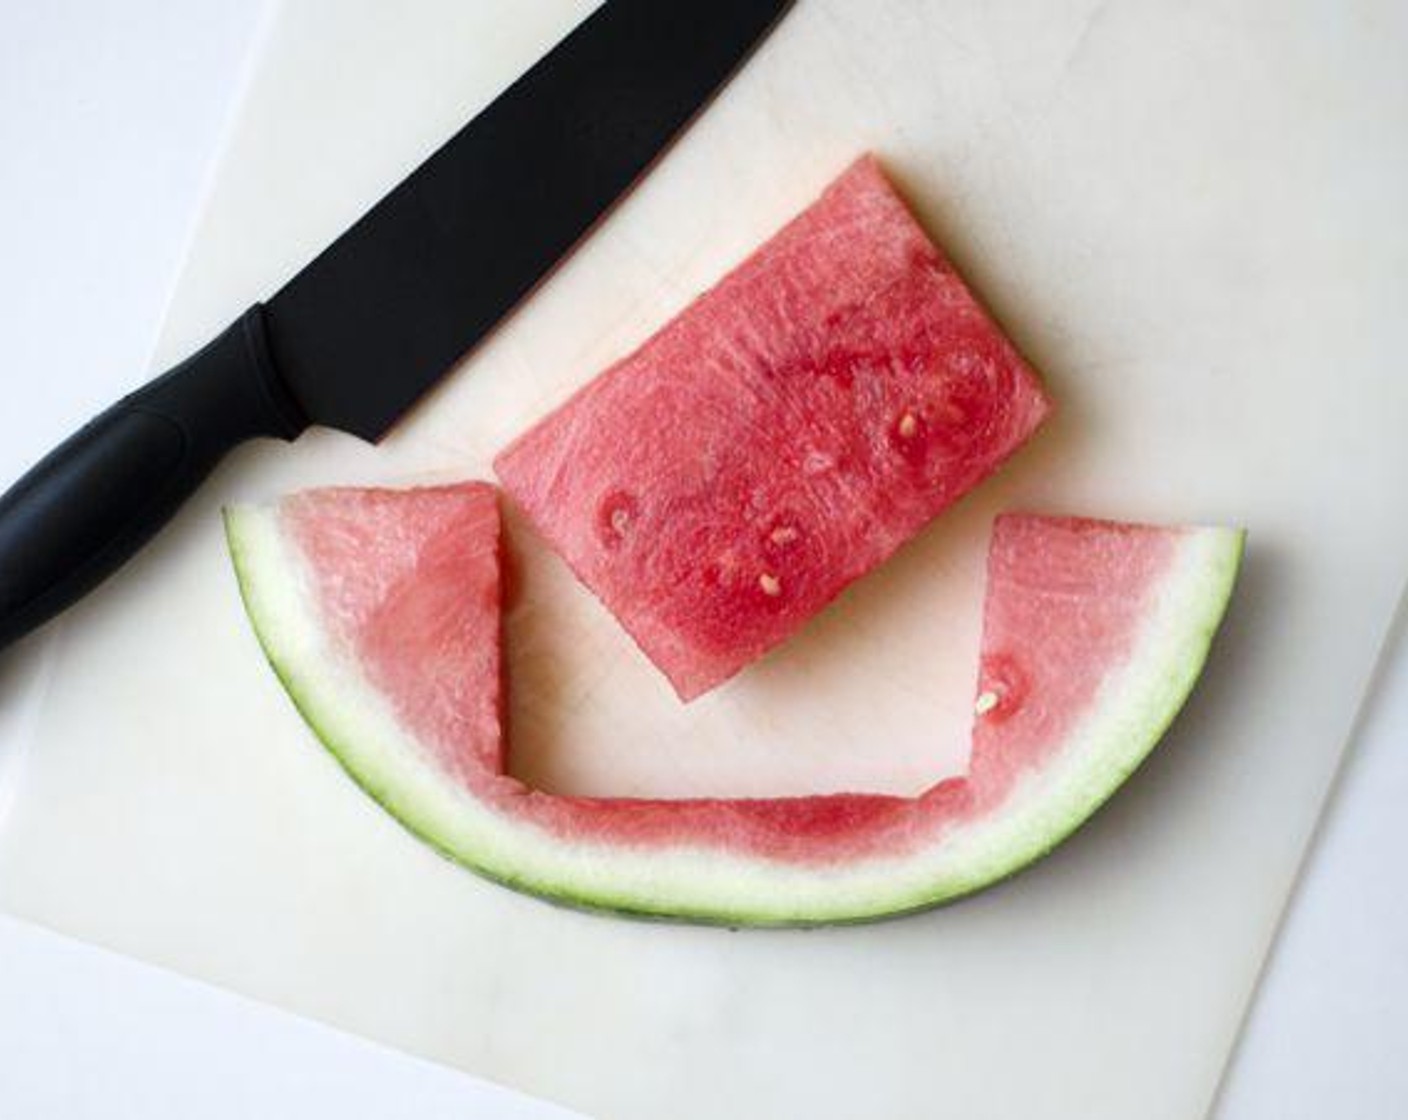 step 1 Cut Seedless Watermelon (1/2) in half lengthwise. Place flat side down, and cut 1 1/2 to 2-inch wide slices, erring on the side of too wide. Cut the largest rectangle possible from each of these slices. You should be able to get about 6 good steaks from 1/2 a watermelon.